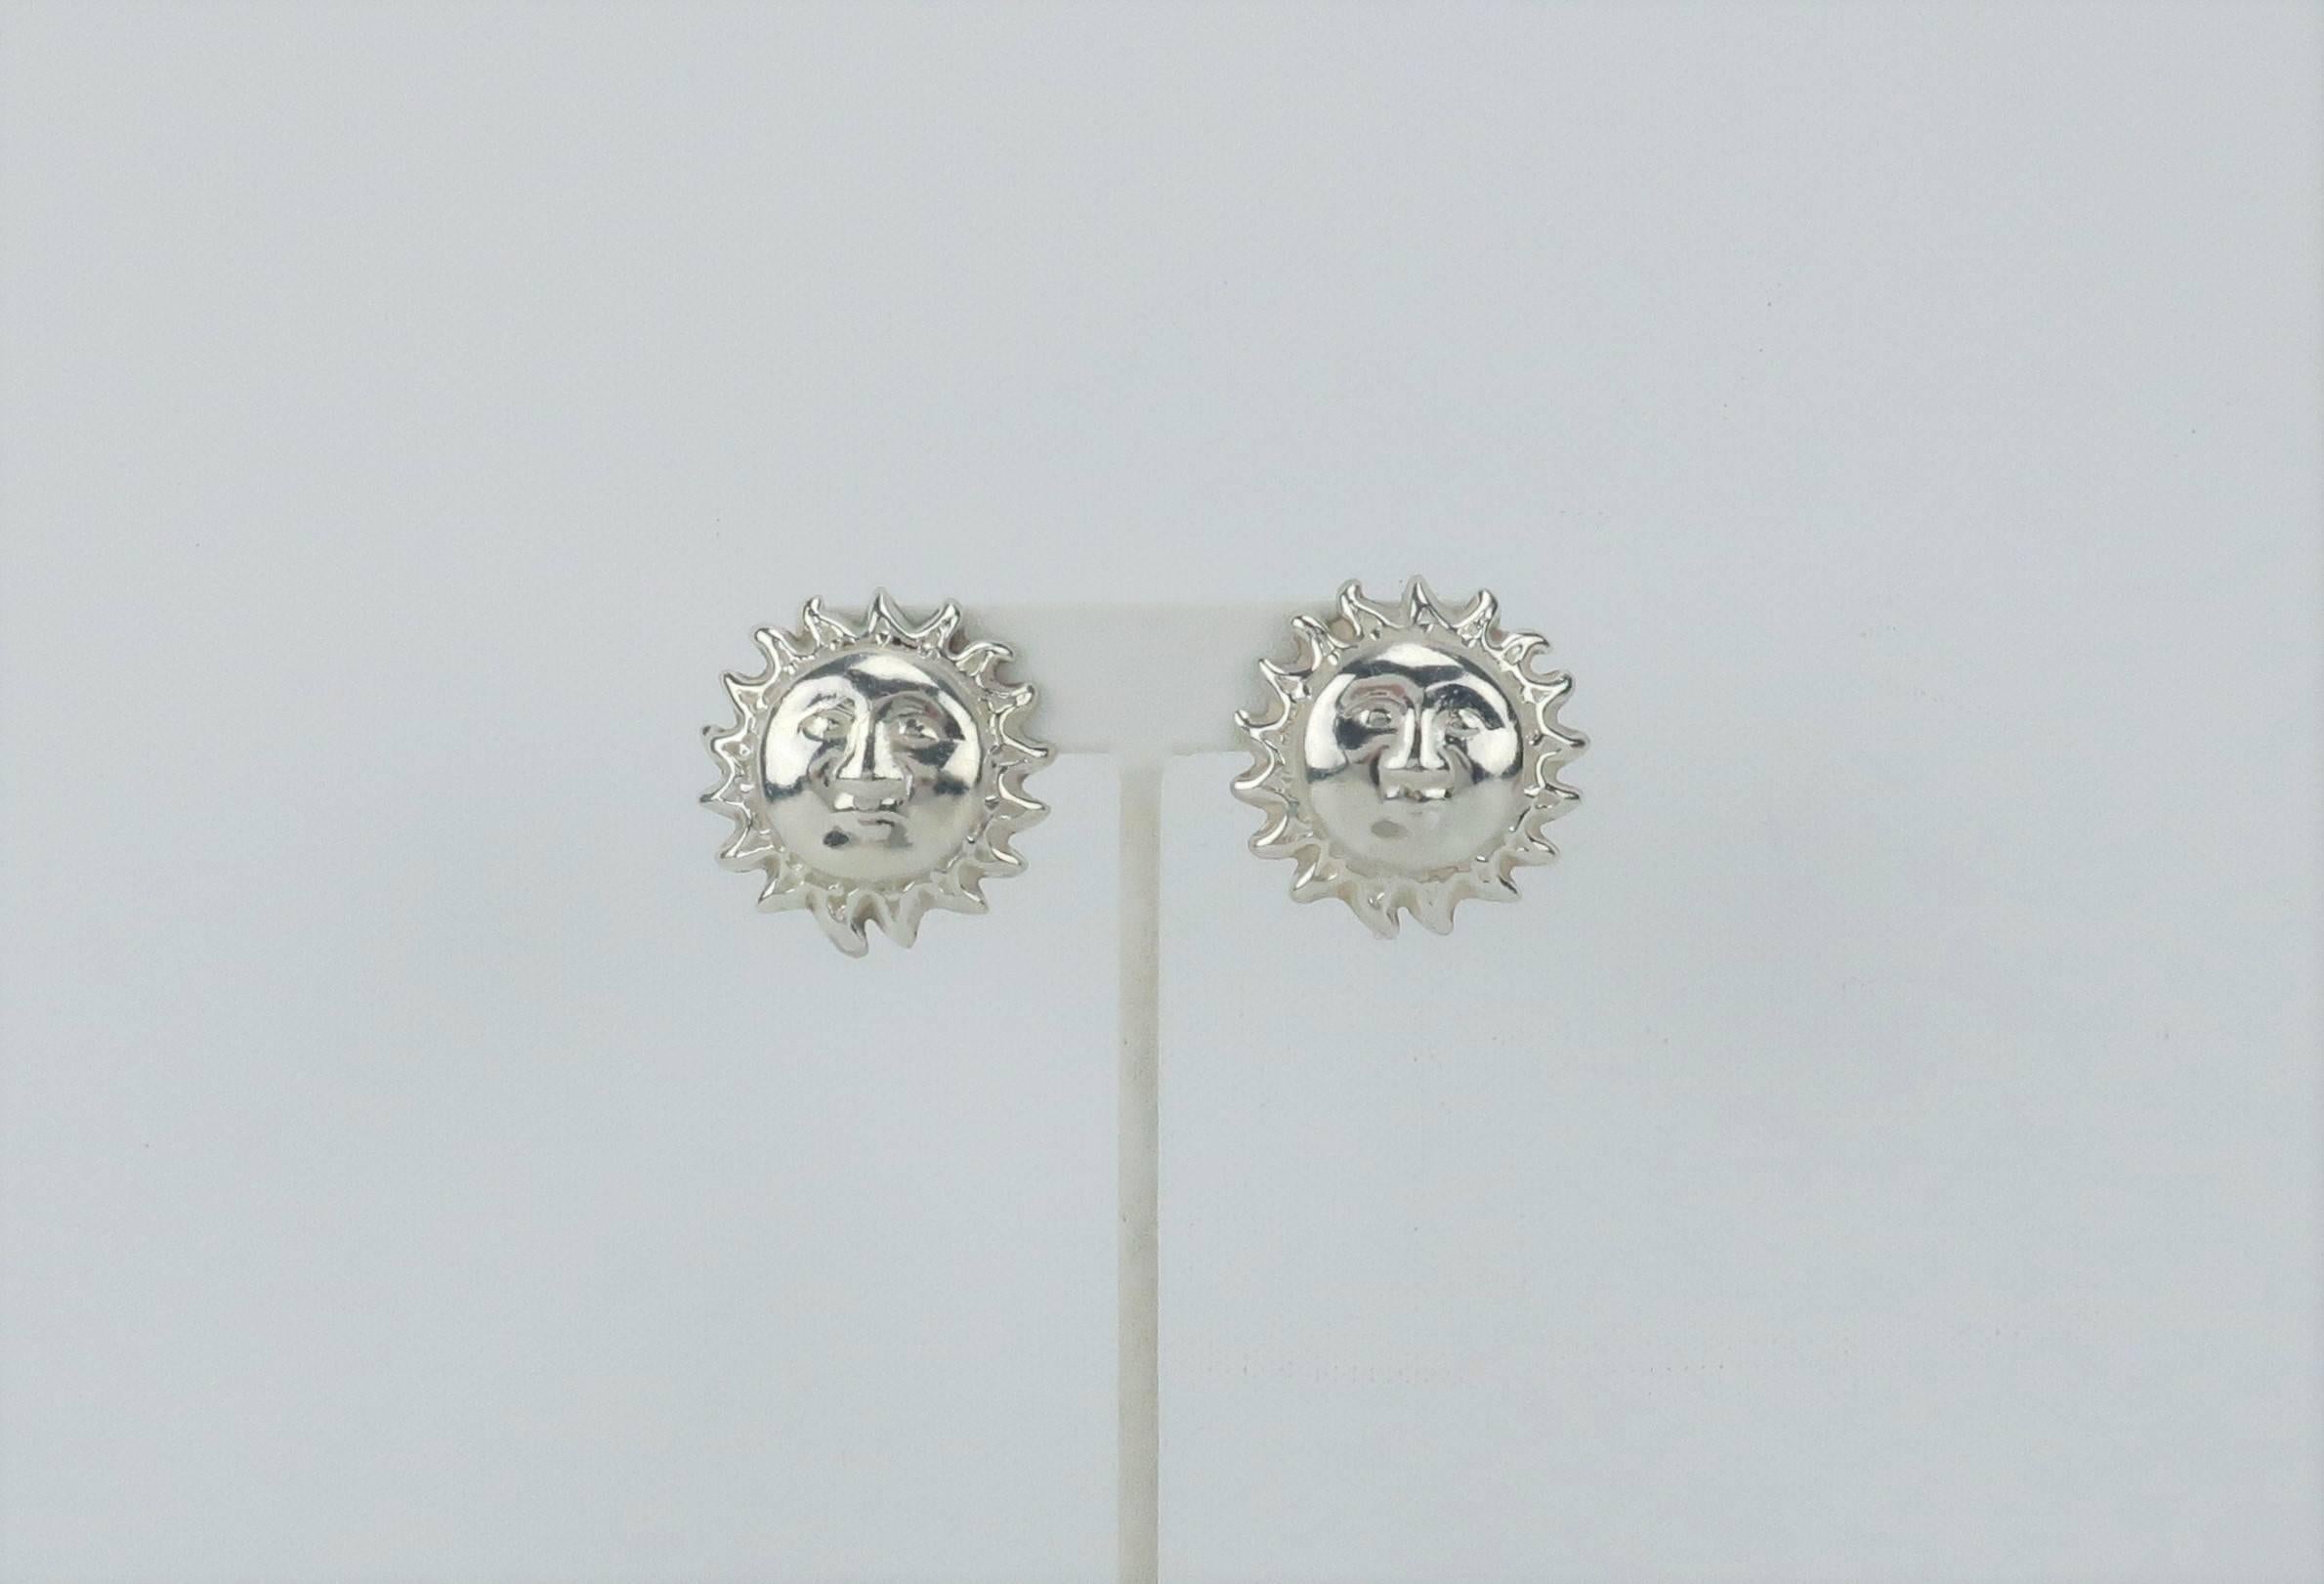 Bring a little sunshine to your day with these artisan made sterling silver earrings from the Taxco region of Mexico.  The whimsical 'man in the sun' imagery is reminiscent of Sergio Bustamante designs and features life like details.  Each earring